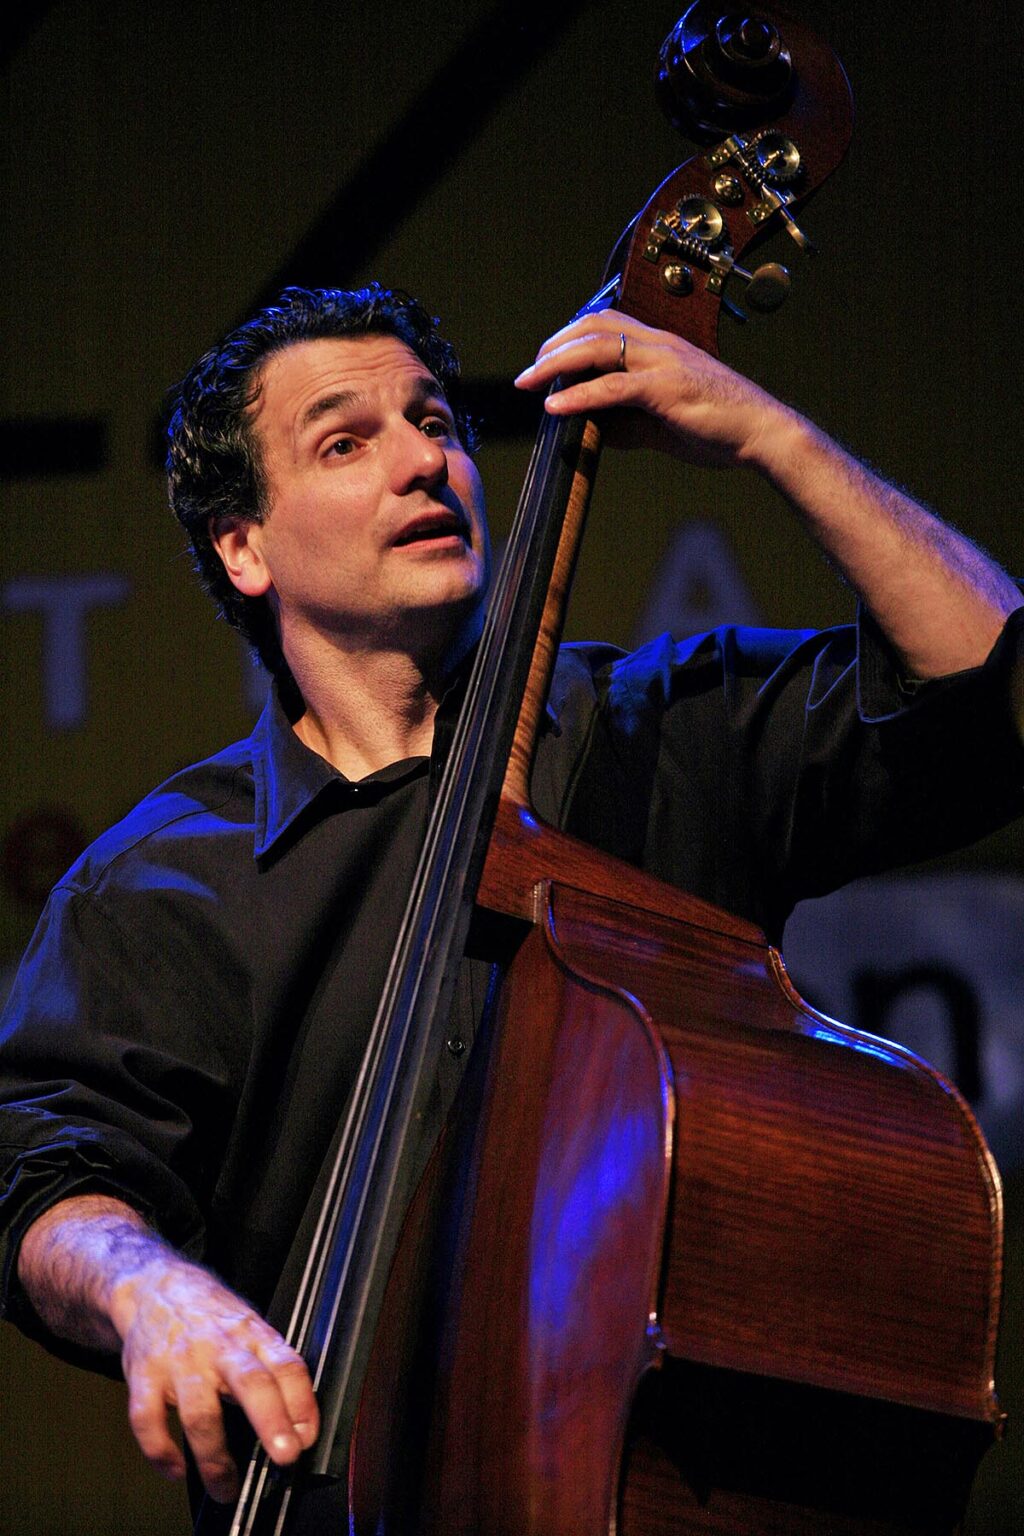 JOHN PATITUCCI plays stand up base with his trio at the 2009 MONTEREY JAZZ FESTIVAL - CALIFORNIA